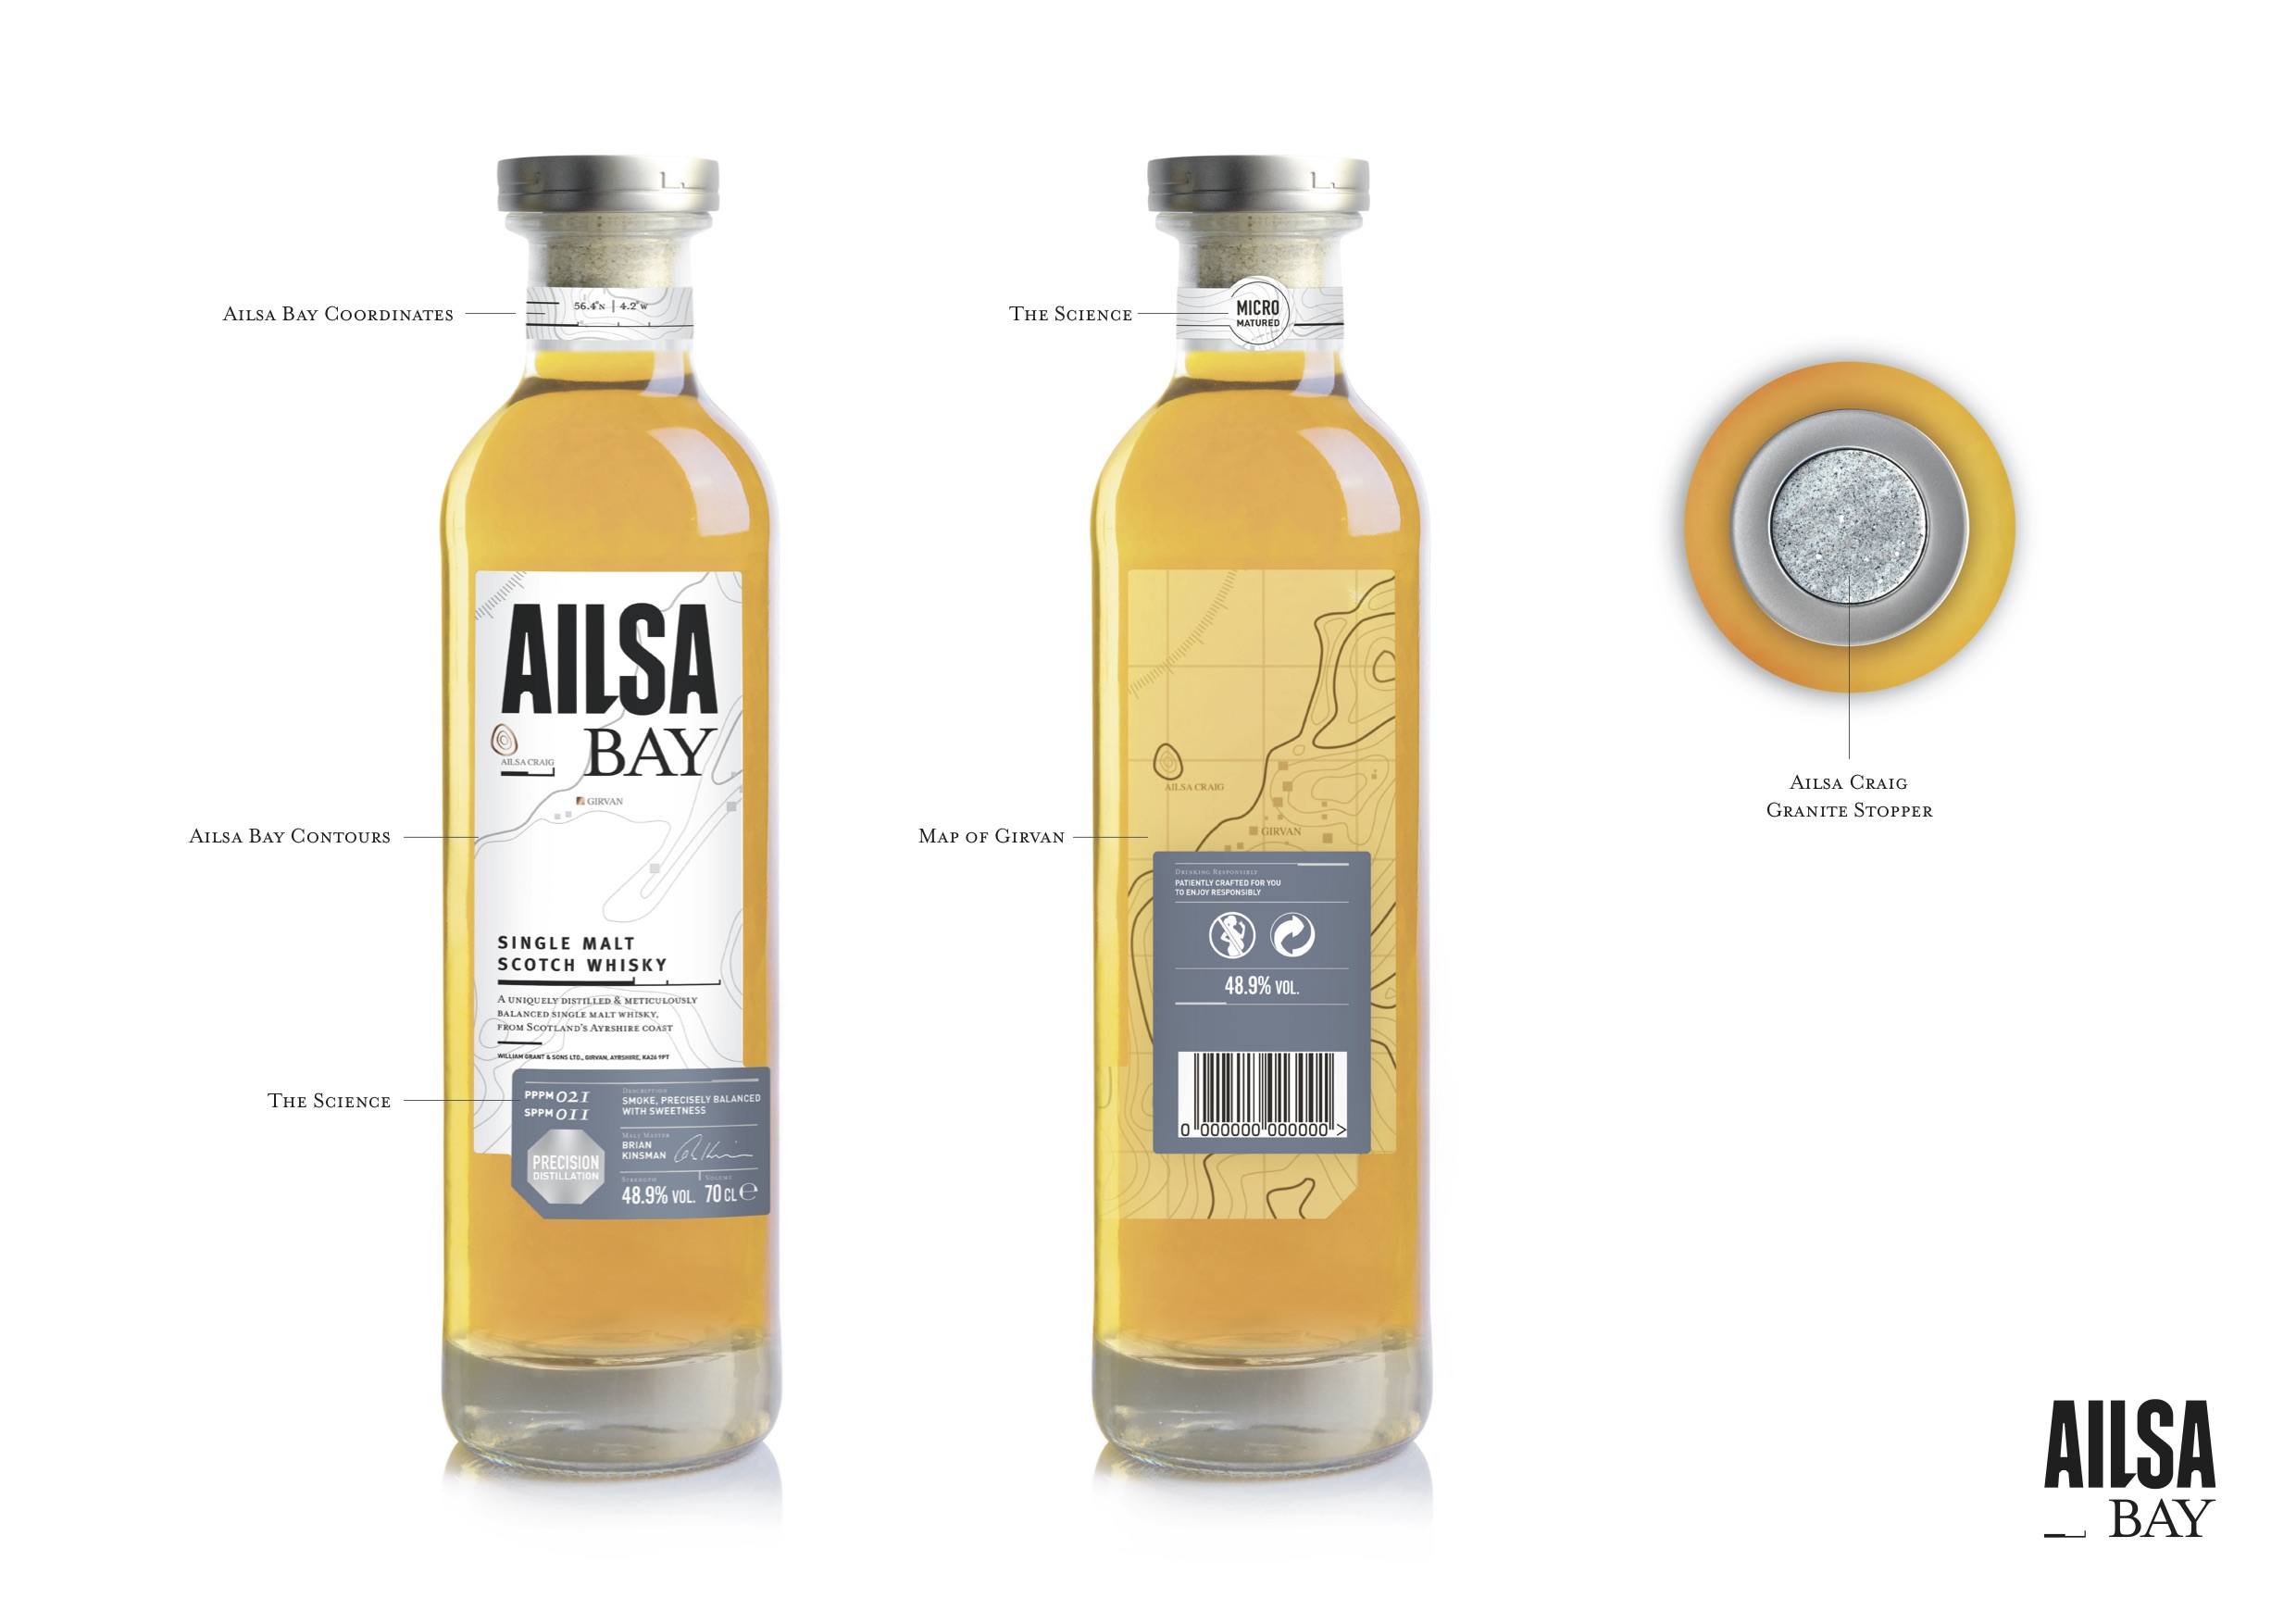 The first single malt release from Ailsa bay: peat and vanilla